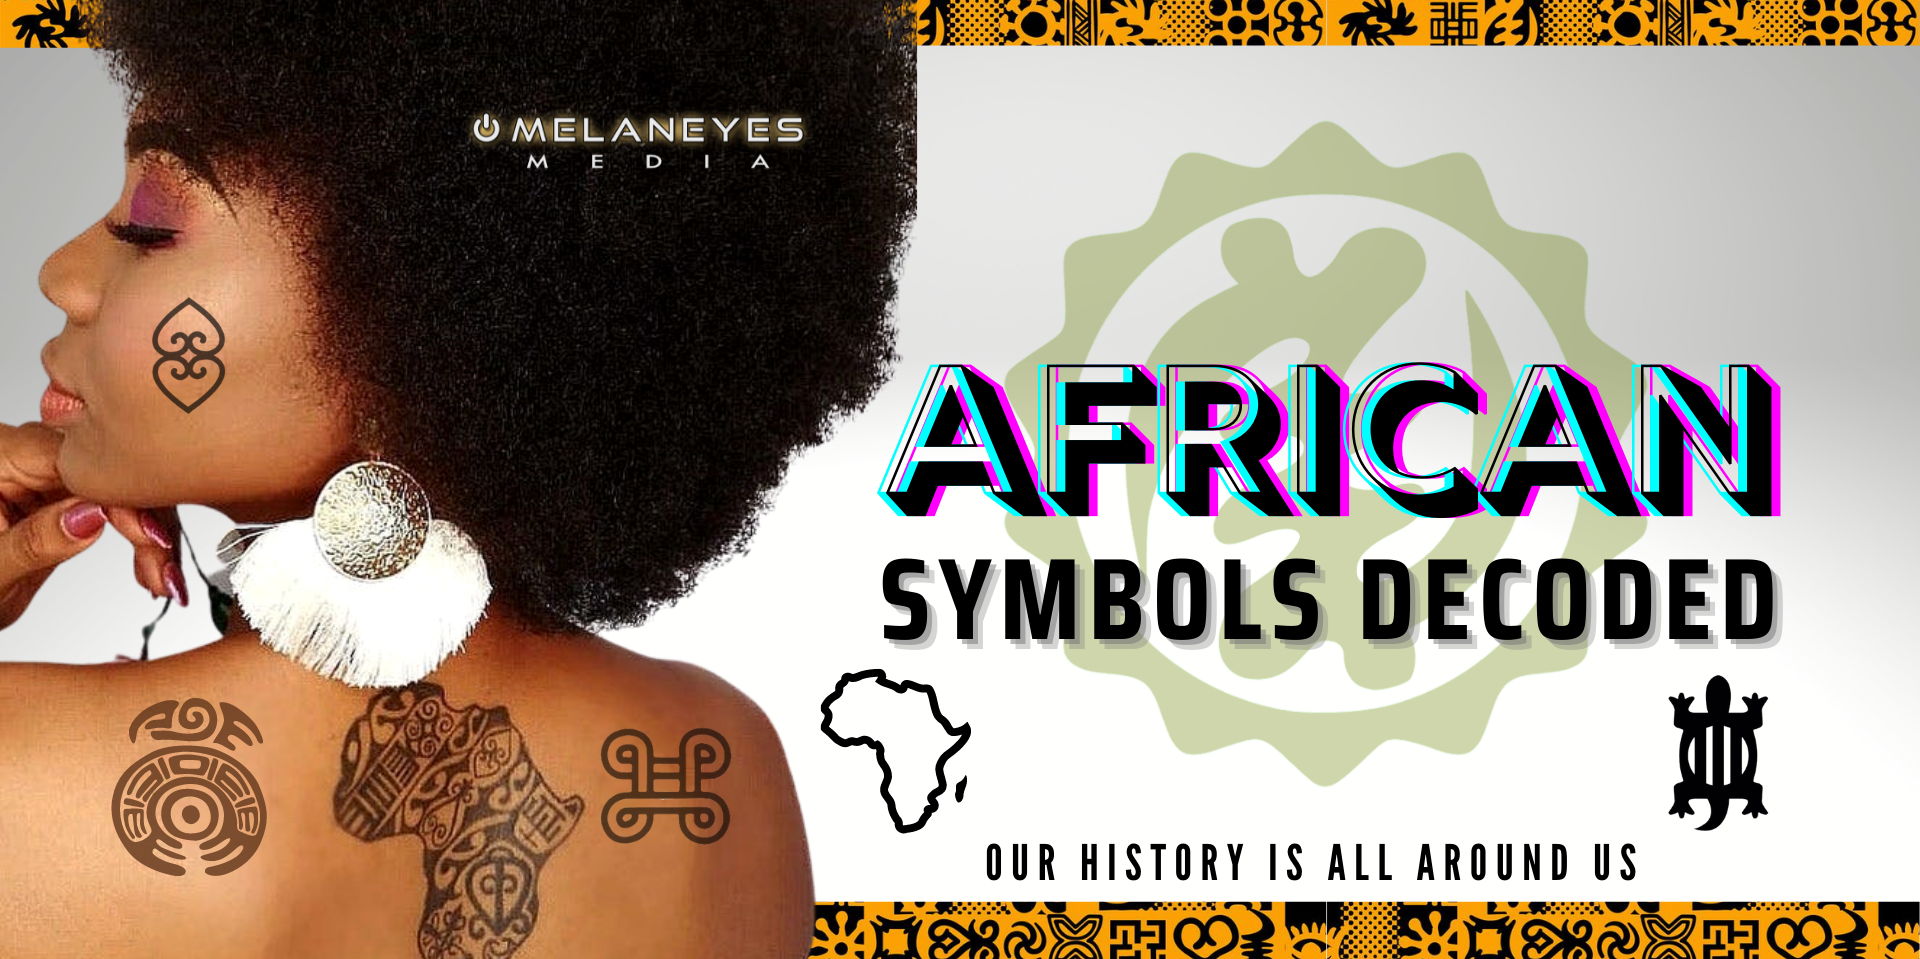 African Symbols Decoded promotional image